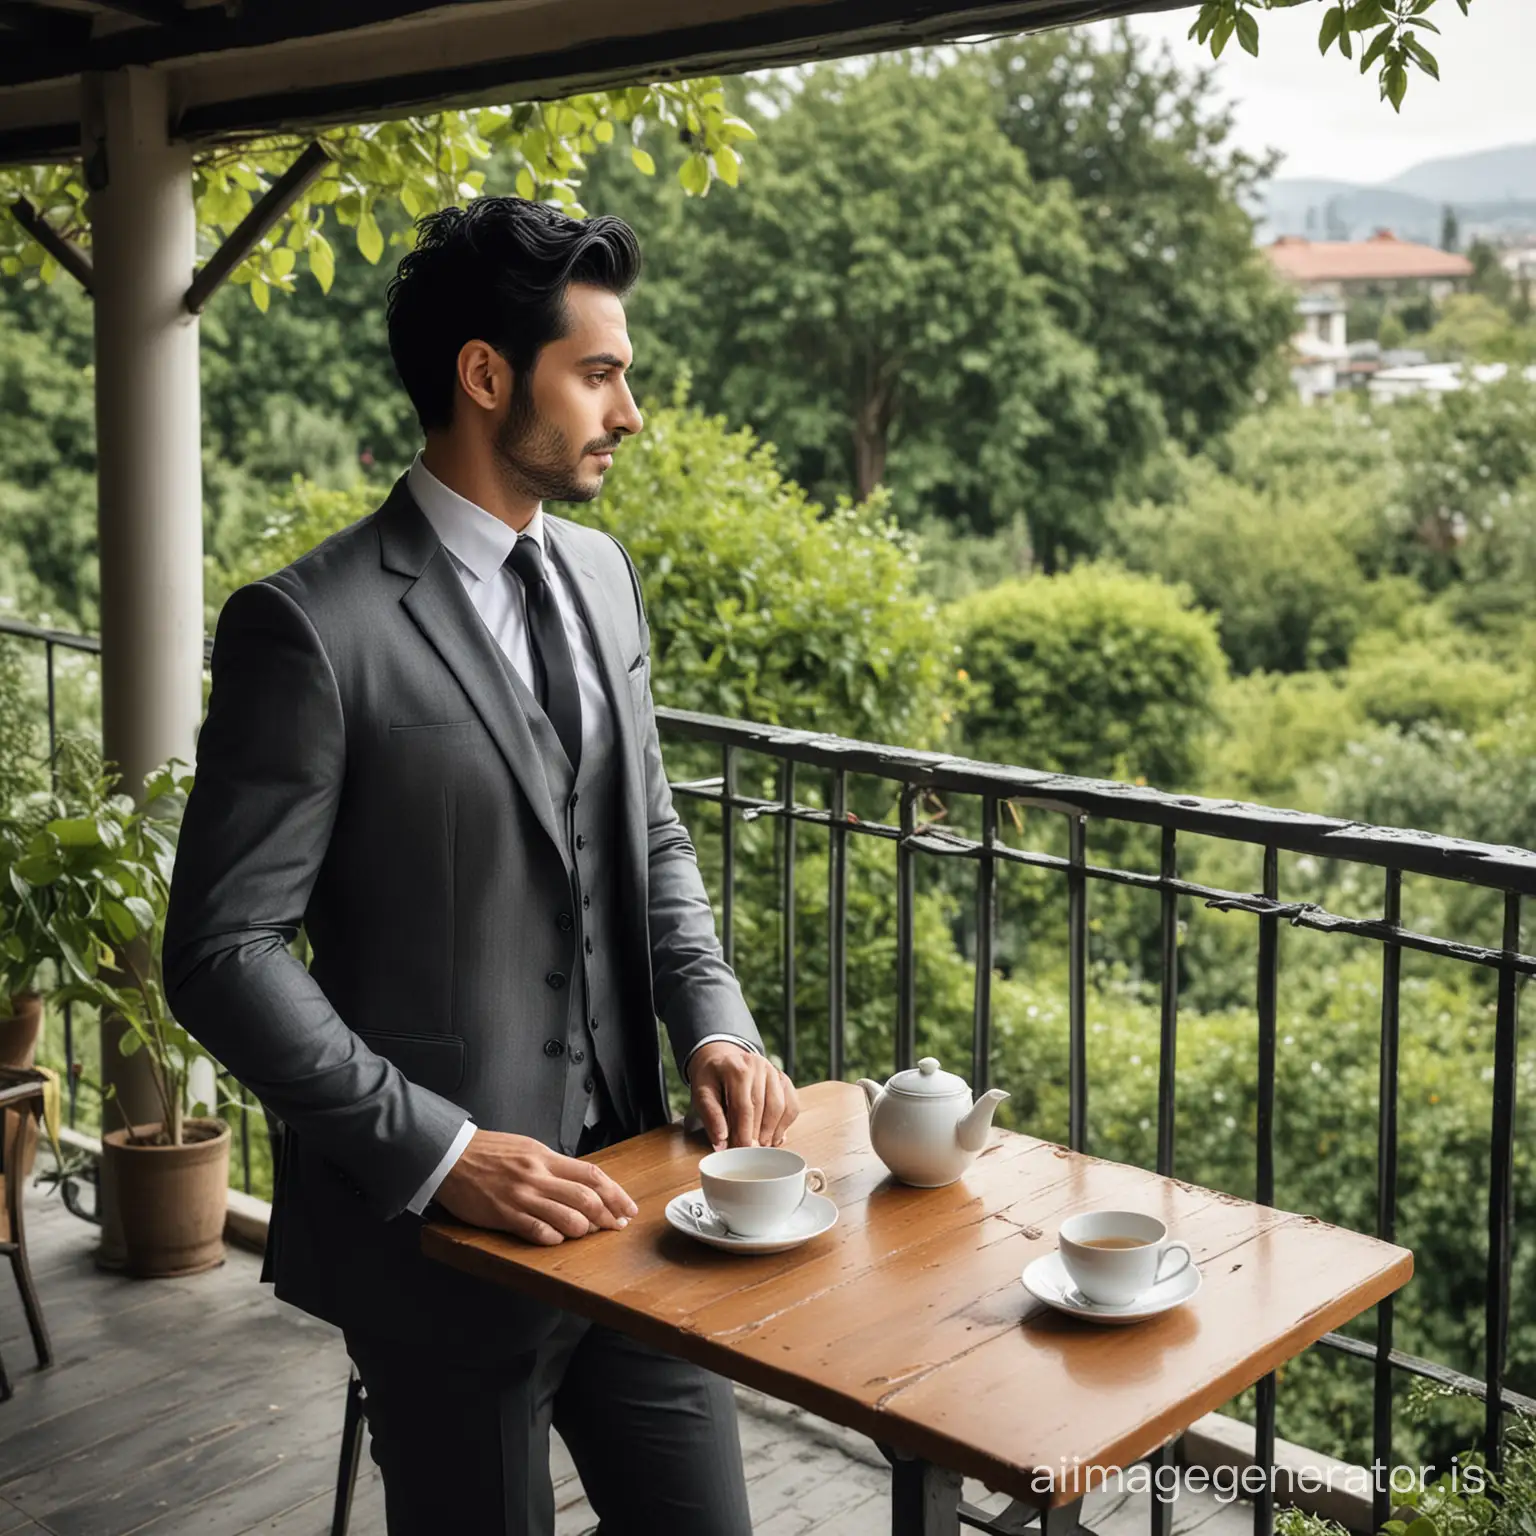 Suited-Man-Enjoying-Tea-on-Balcony-with-Garden-View